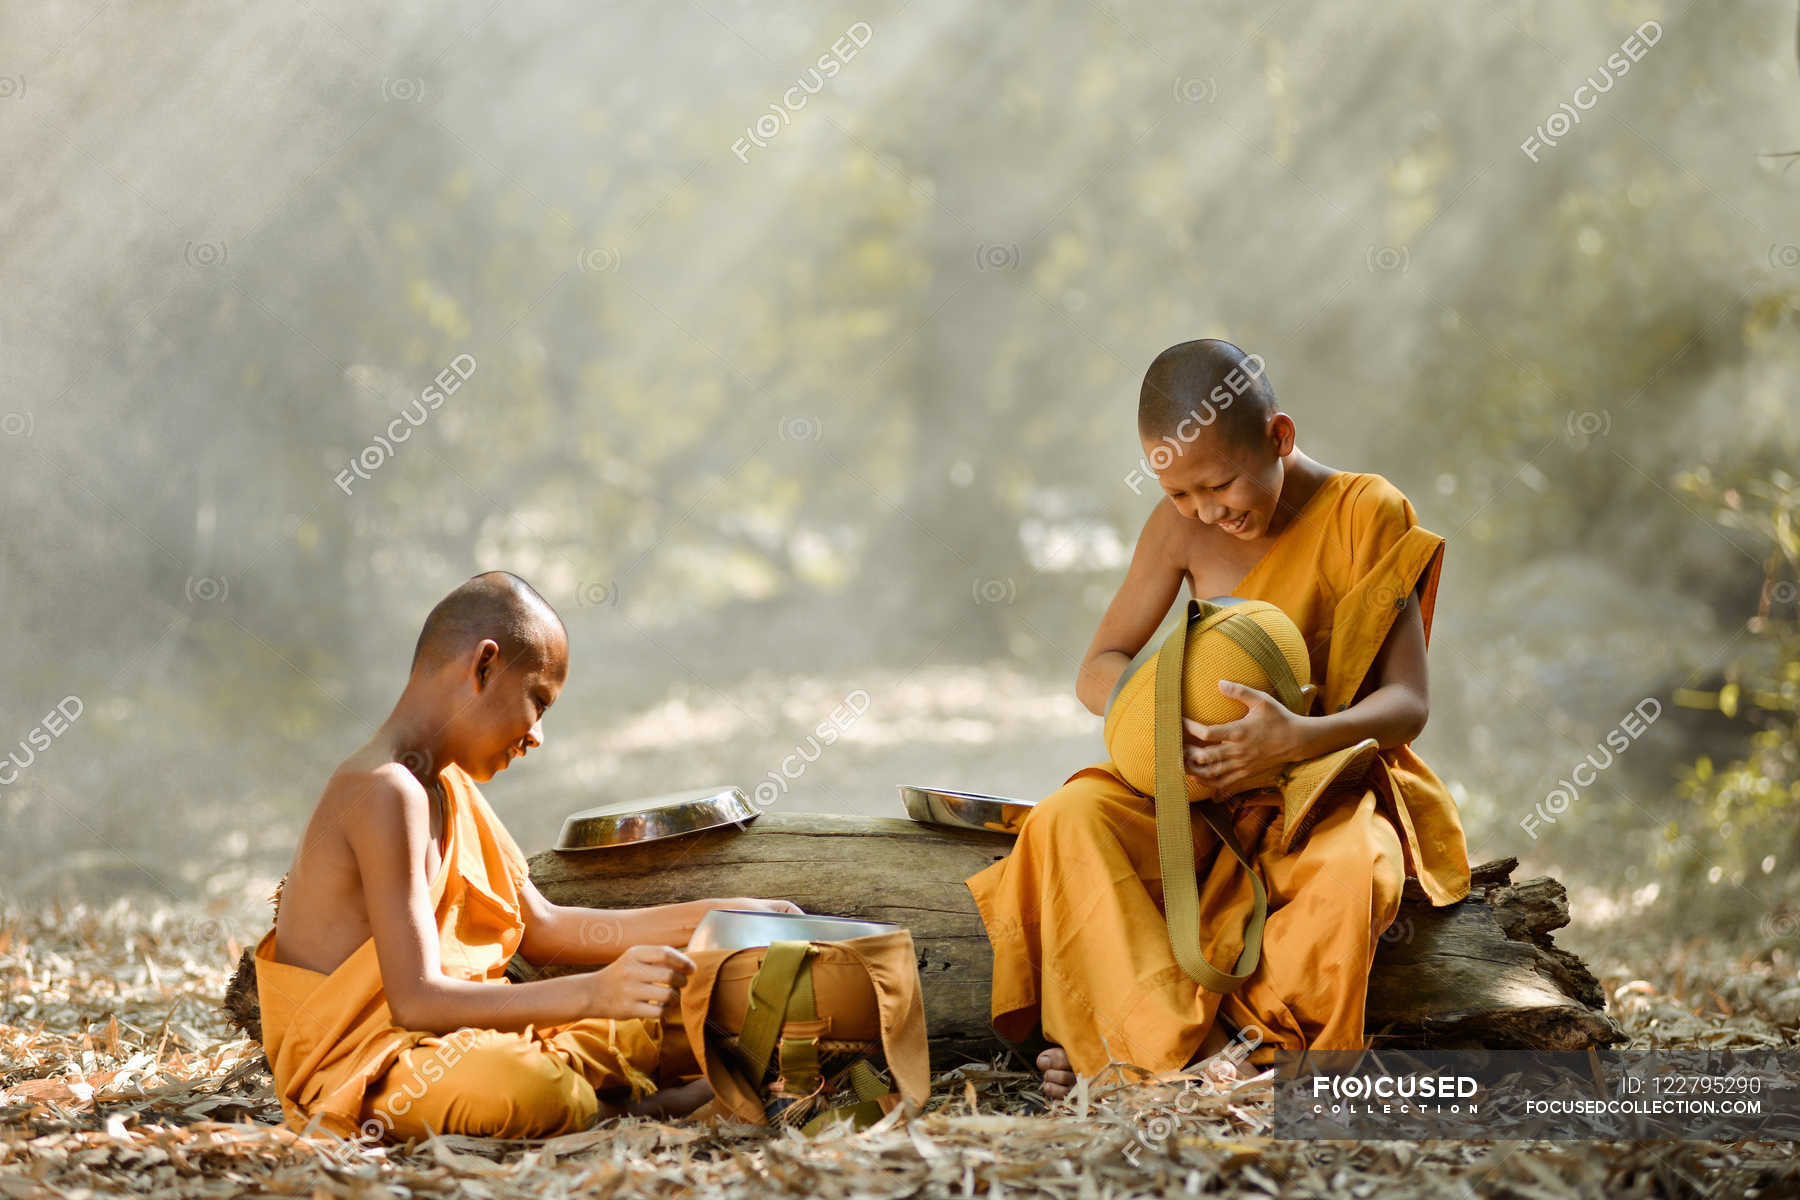 Buddhist monks sitting in forest — Stock Photo | #122795290